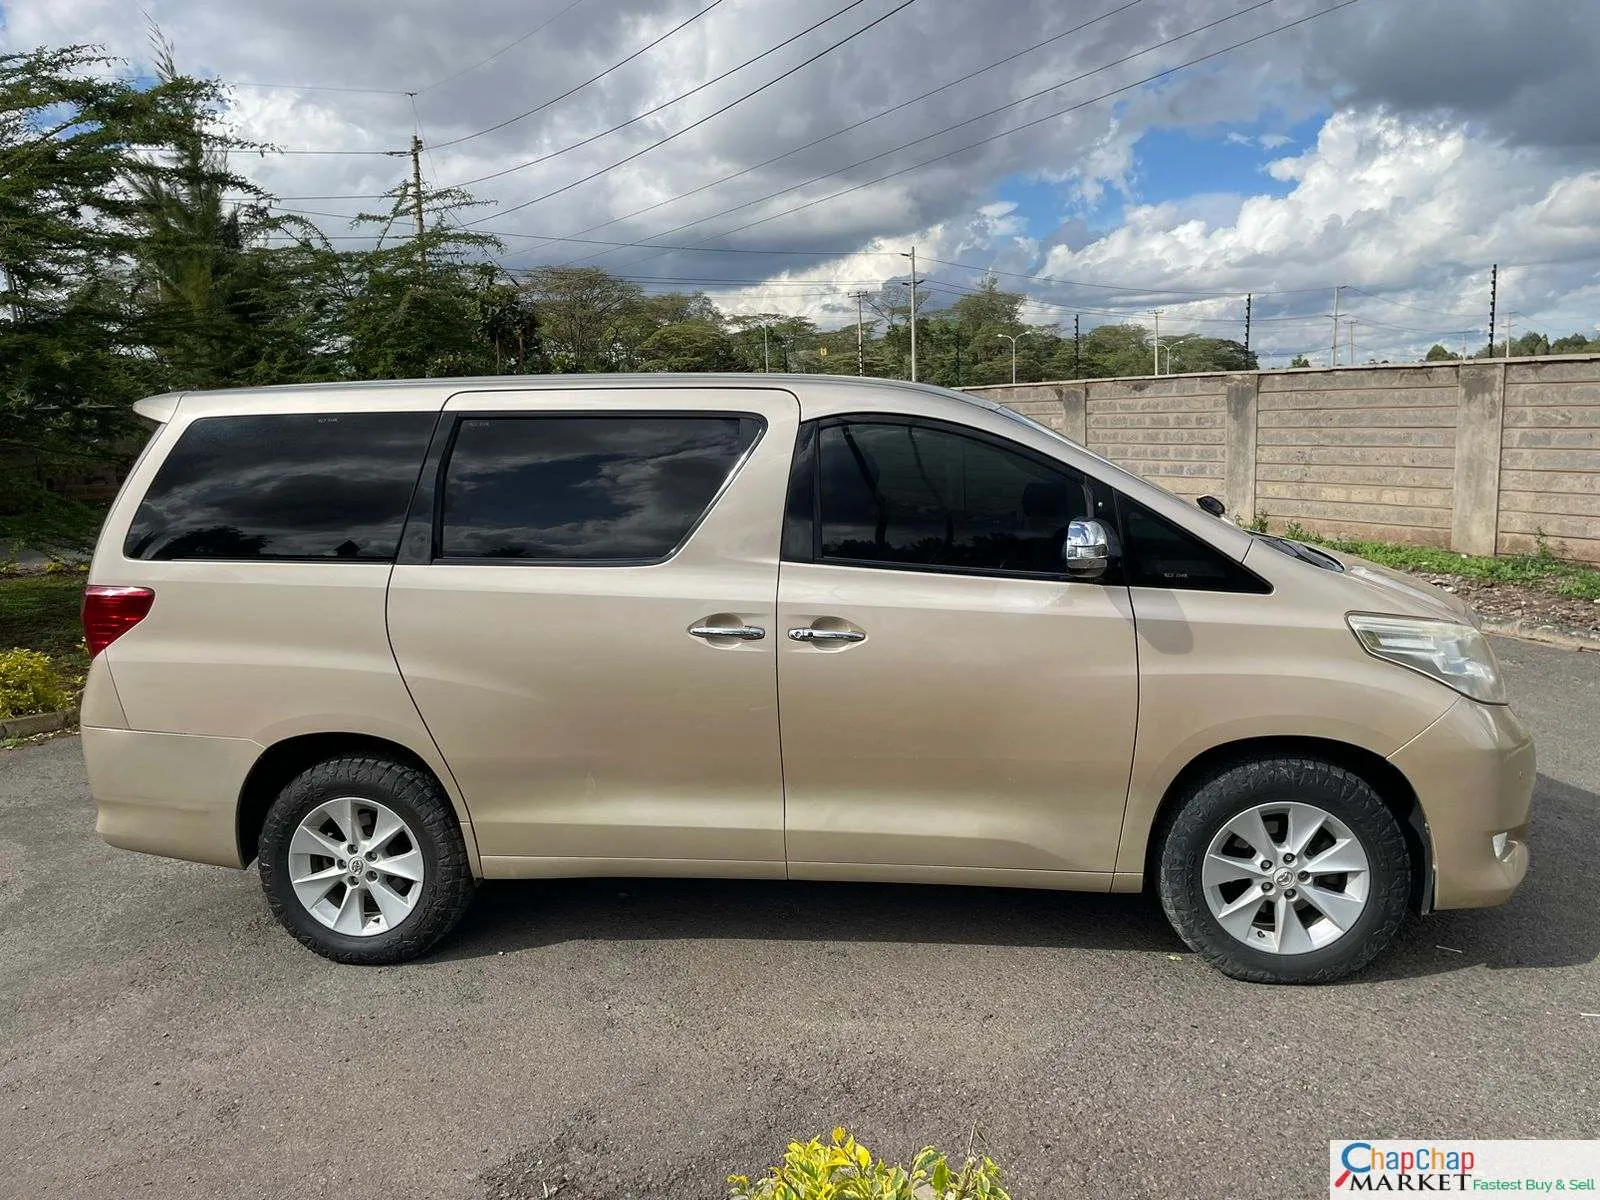 Toyota Alphard HOT DEAL You Pay 20% Deposit Trade in OK , Cheapest